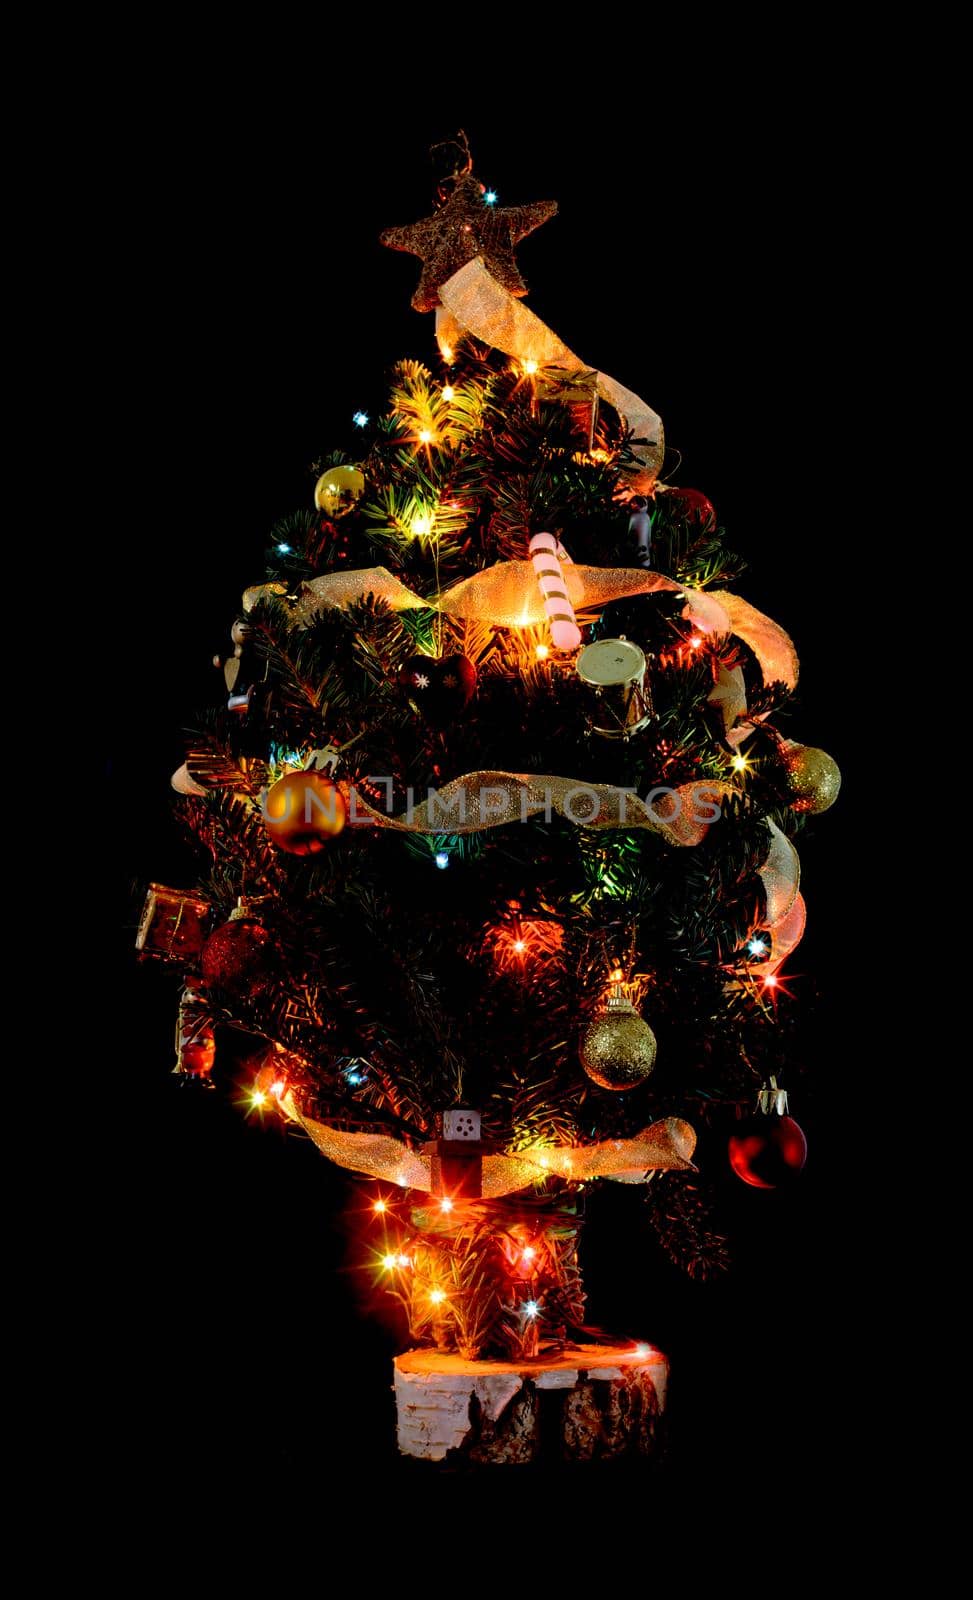 Little Christmas tree from pine branches on a black background